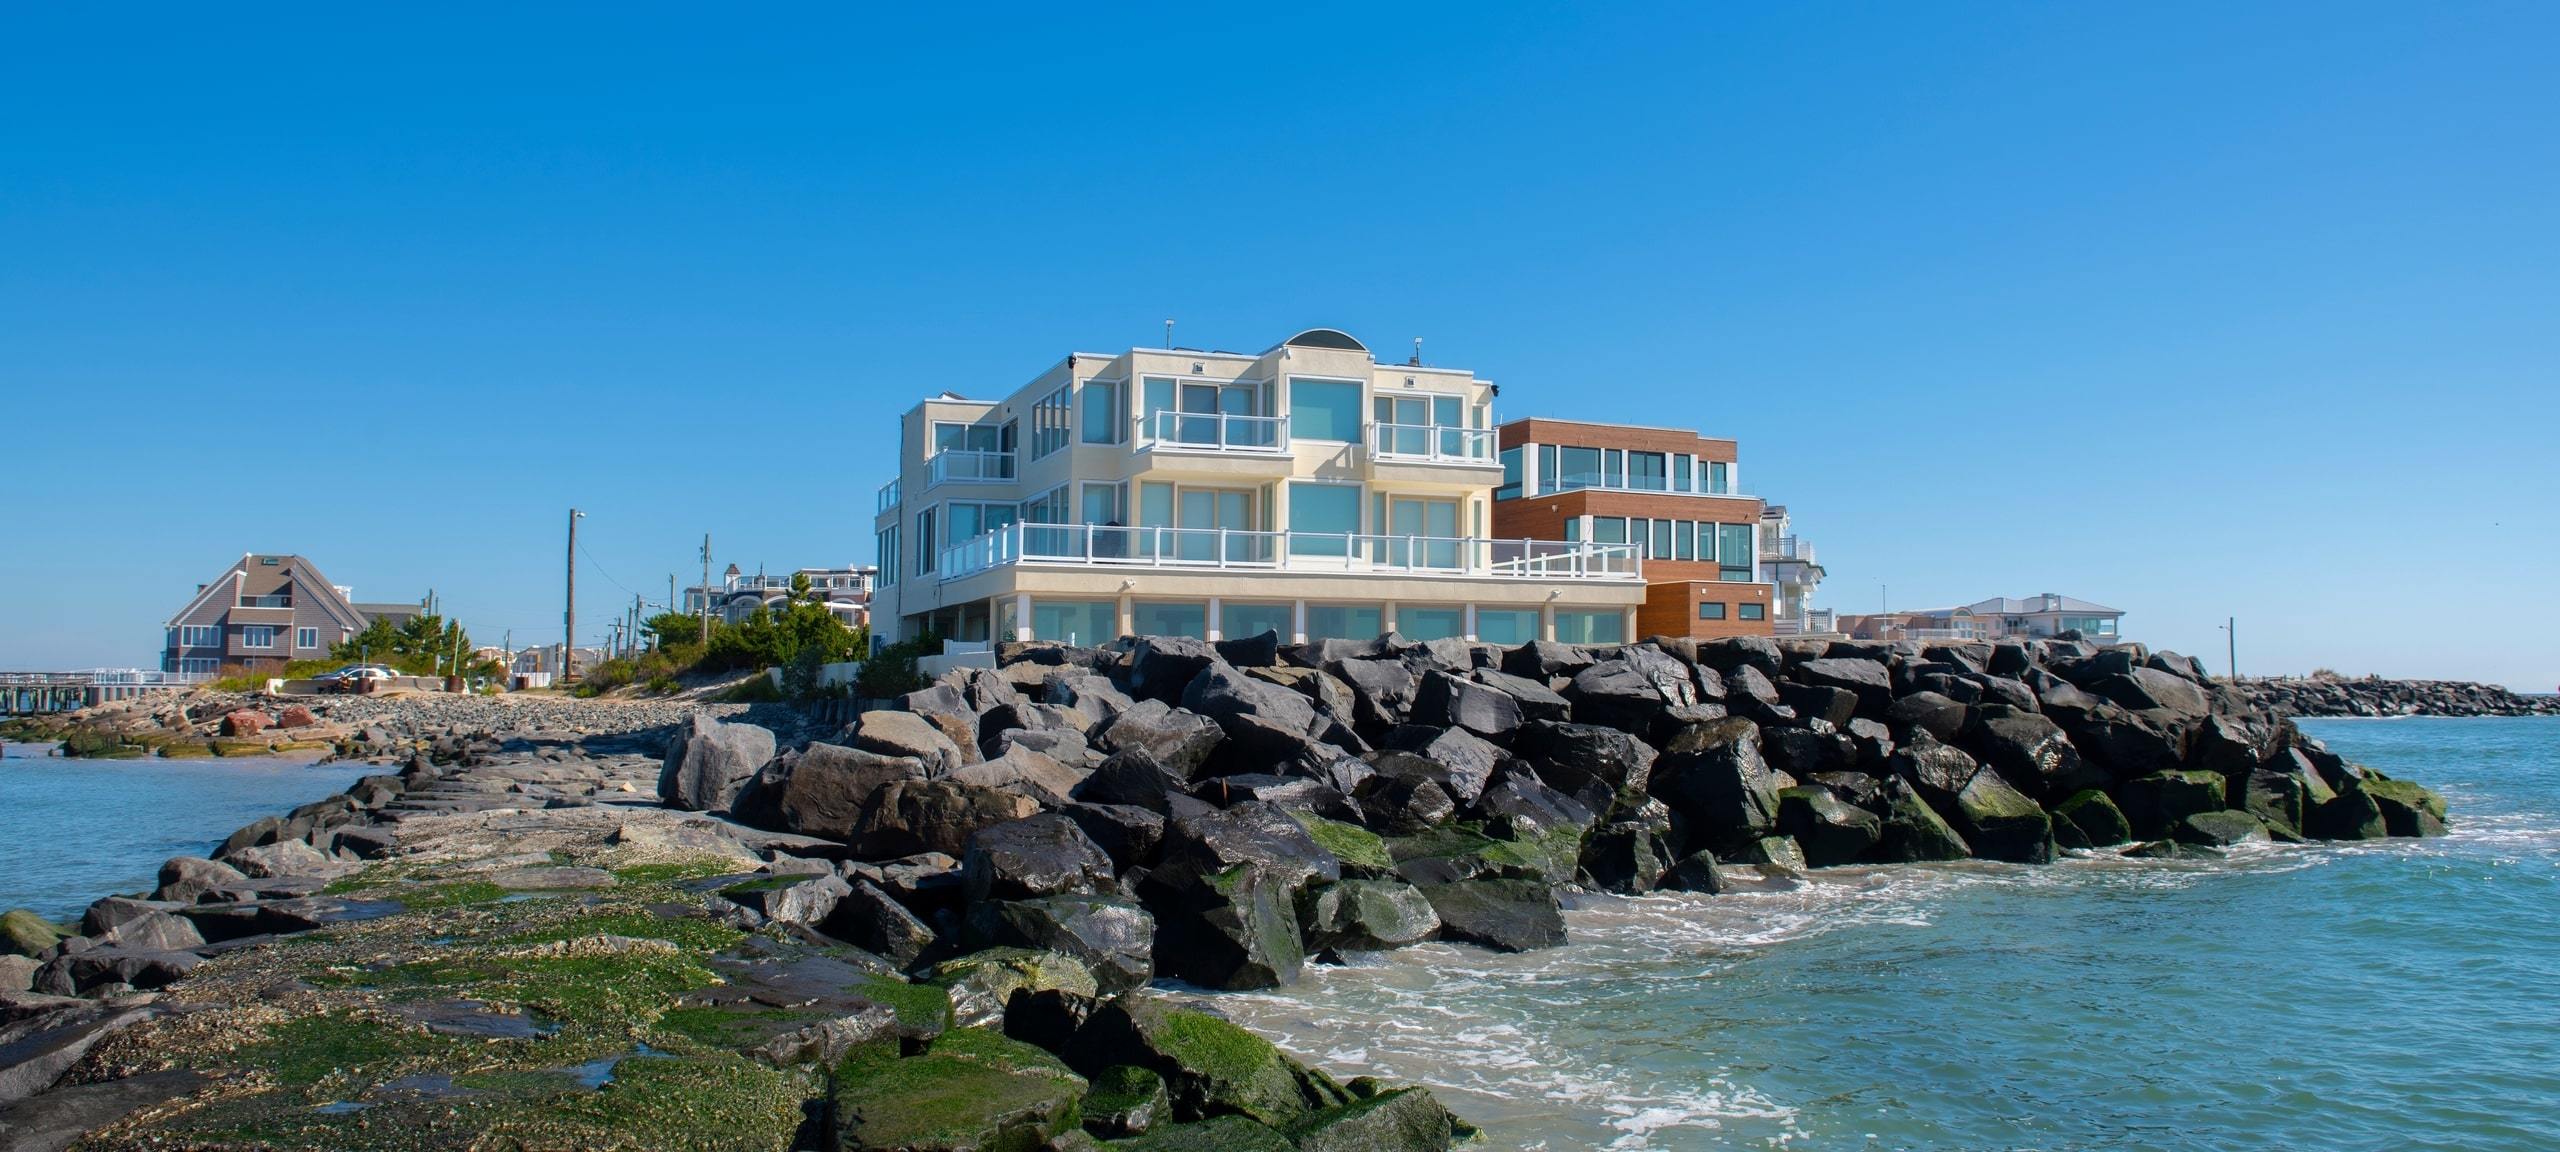 Luxury bayfront home in Jersey Shore, located on rocky shoreline